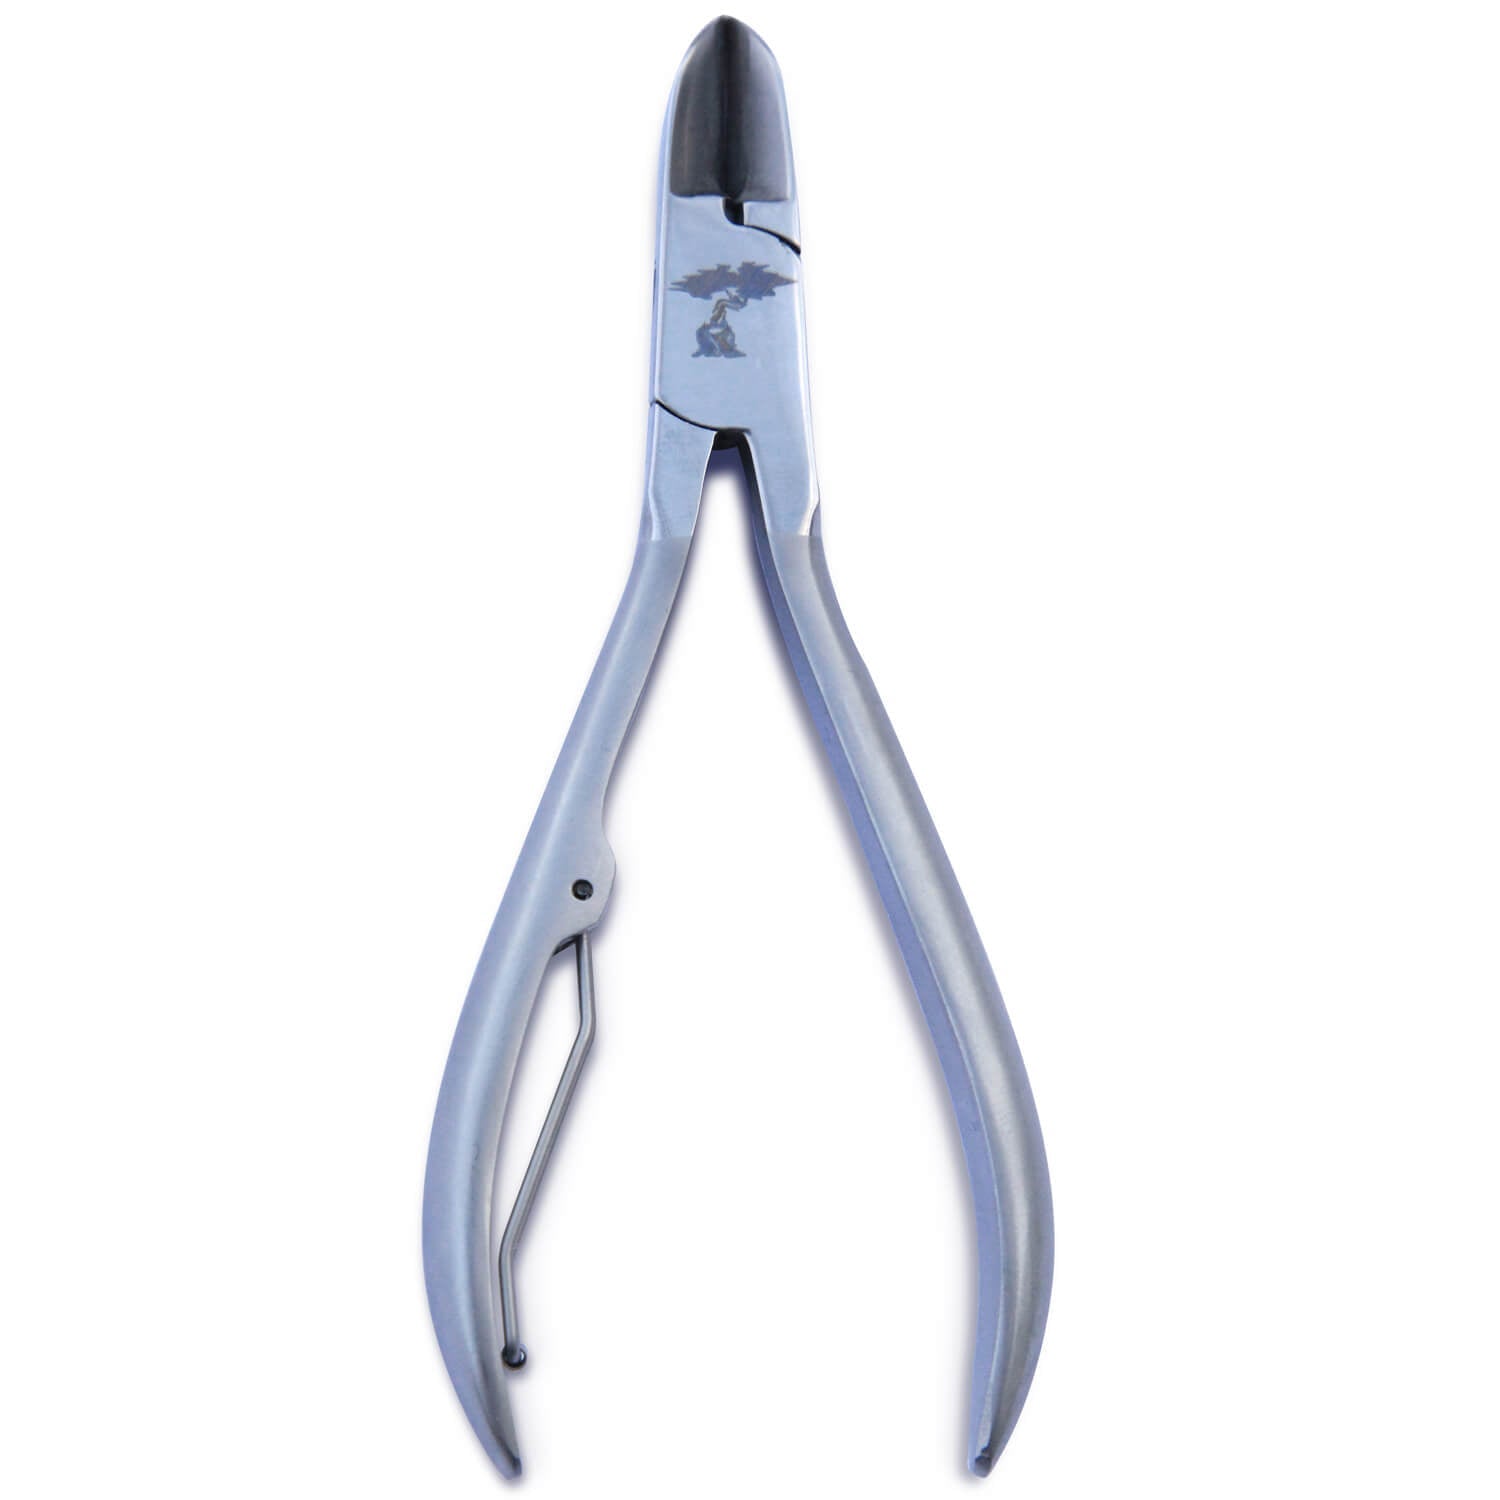 The Best Nail Clippers